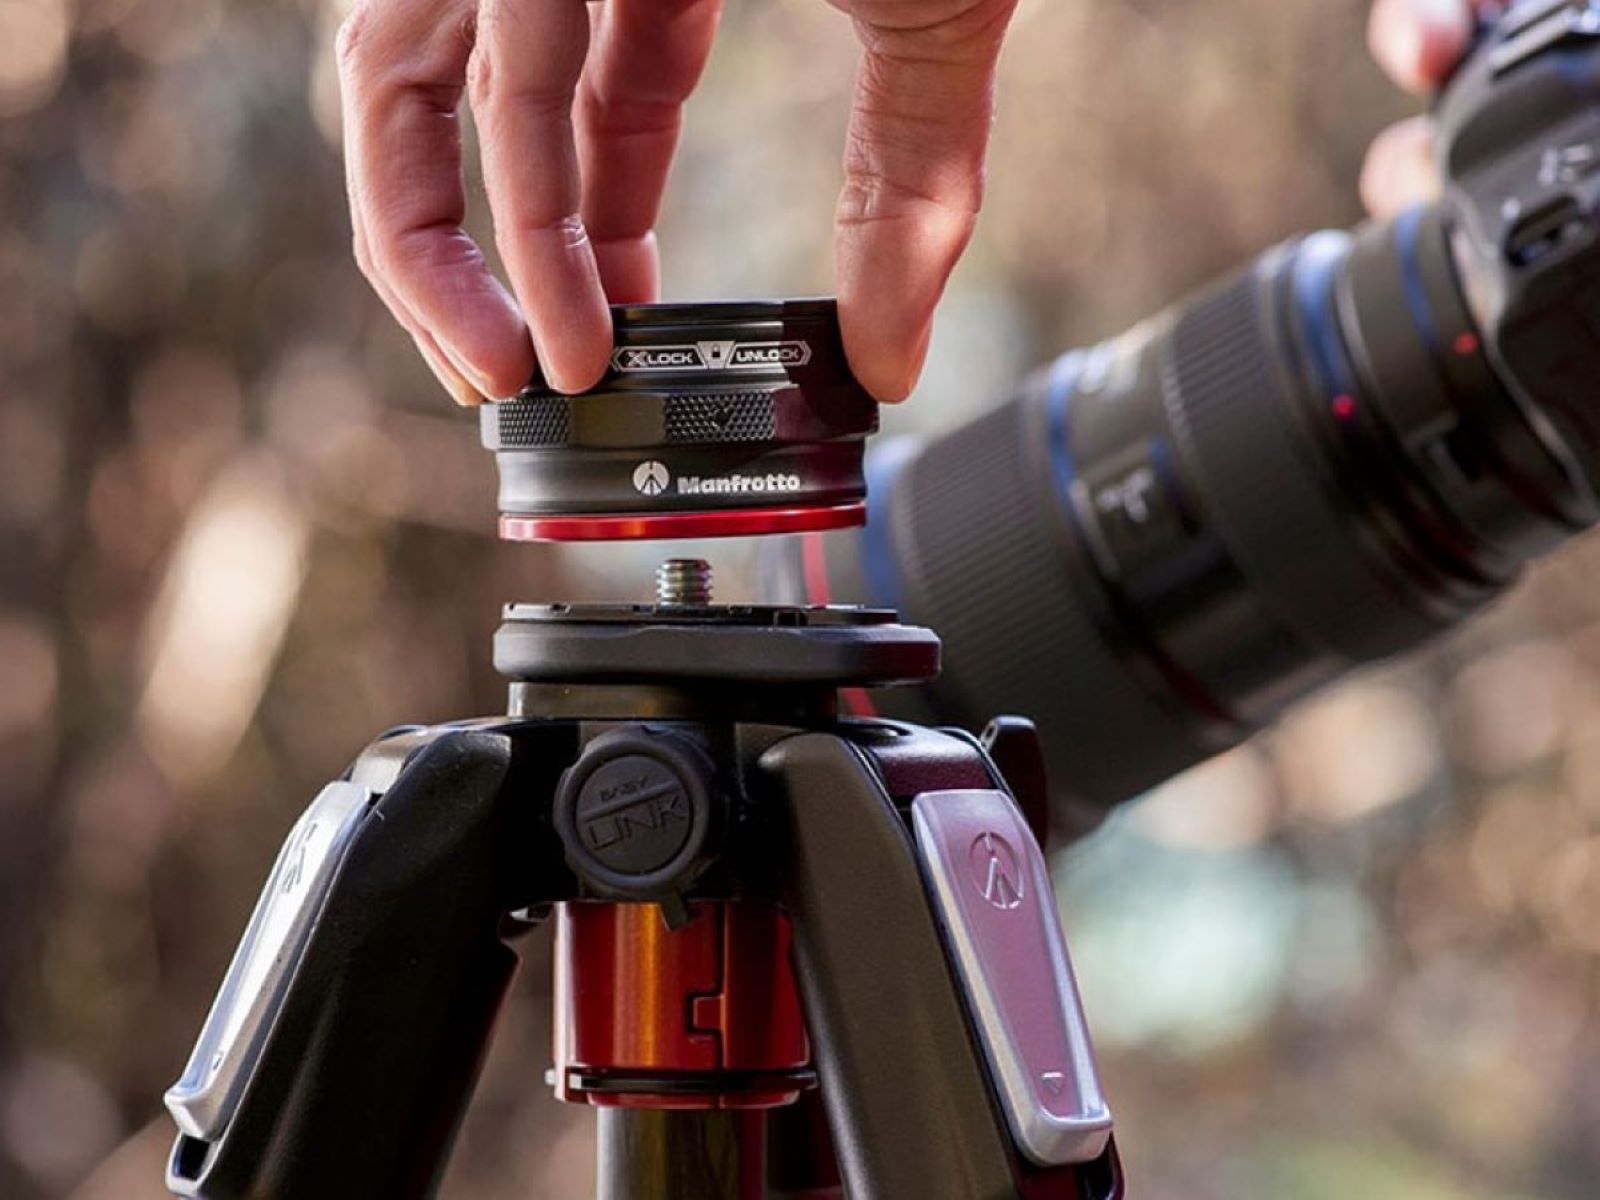 Removing The Head Screw On Your Manfrotto Monopod: A Quick Fix